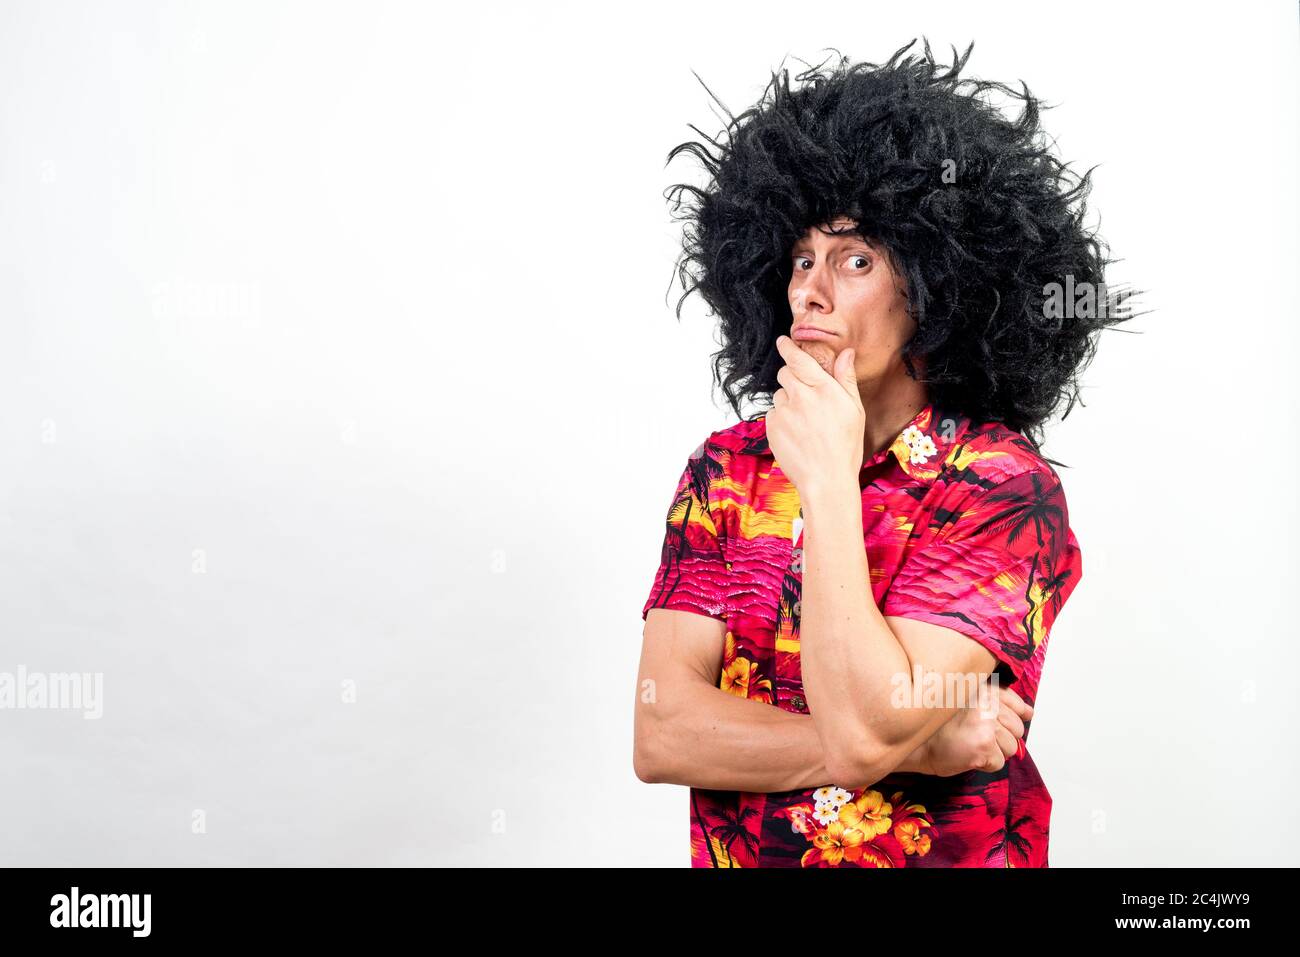 Man in afro wig and hawaiian shirt, very thoughtful. Mid shot. White background. Stock Photo